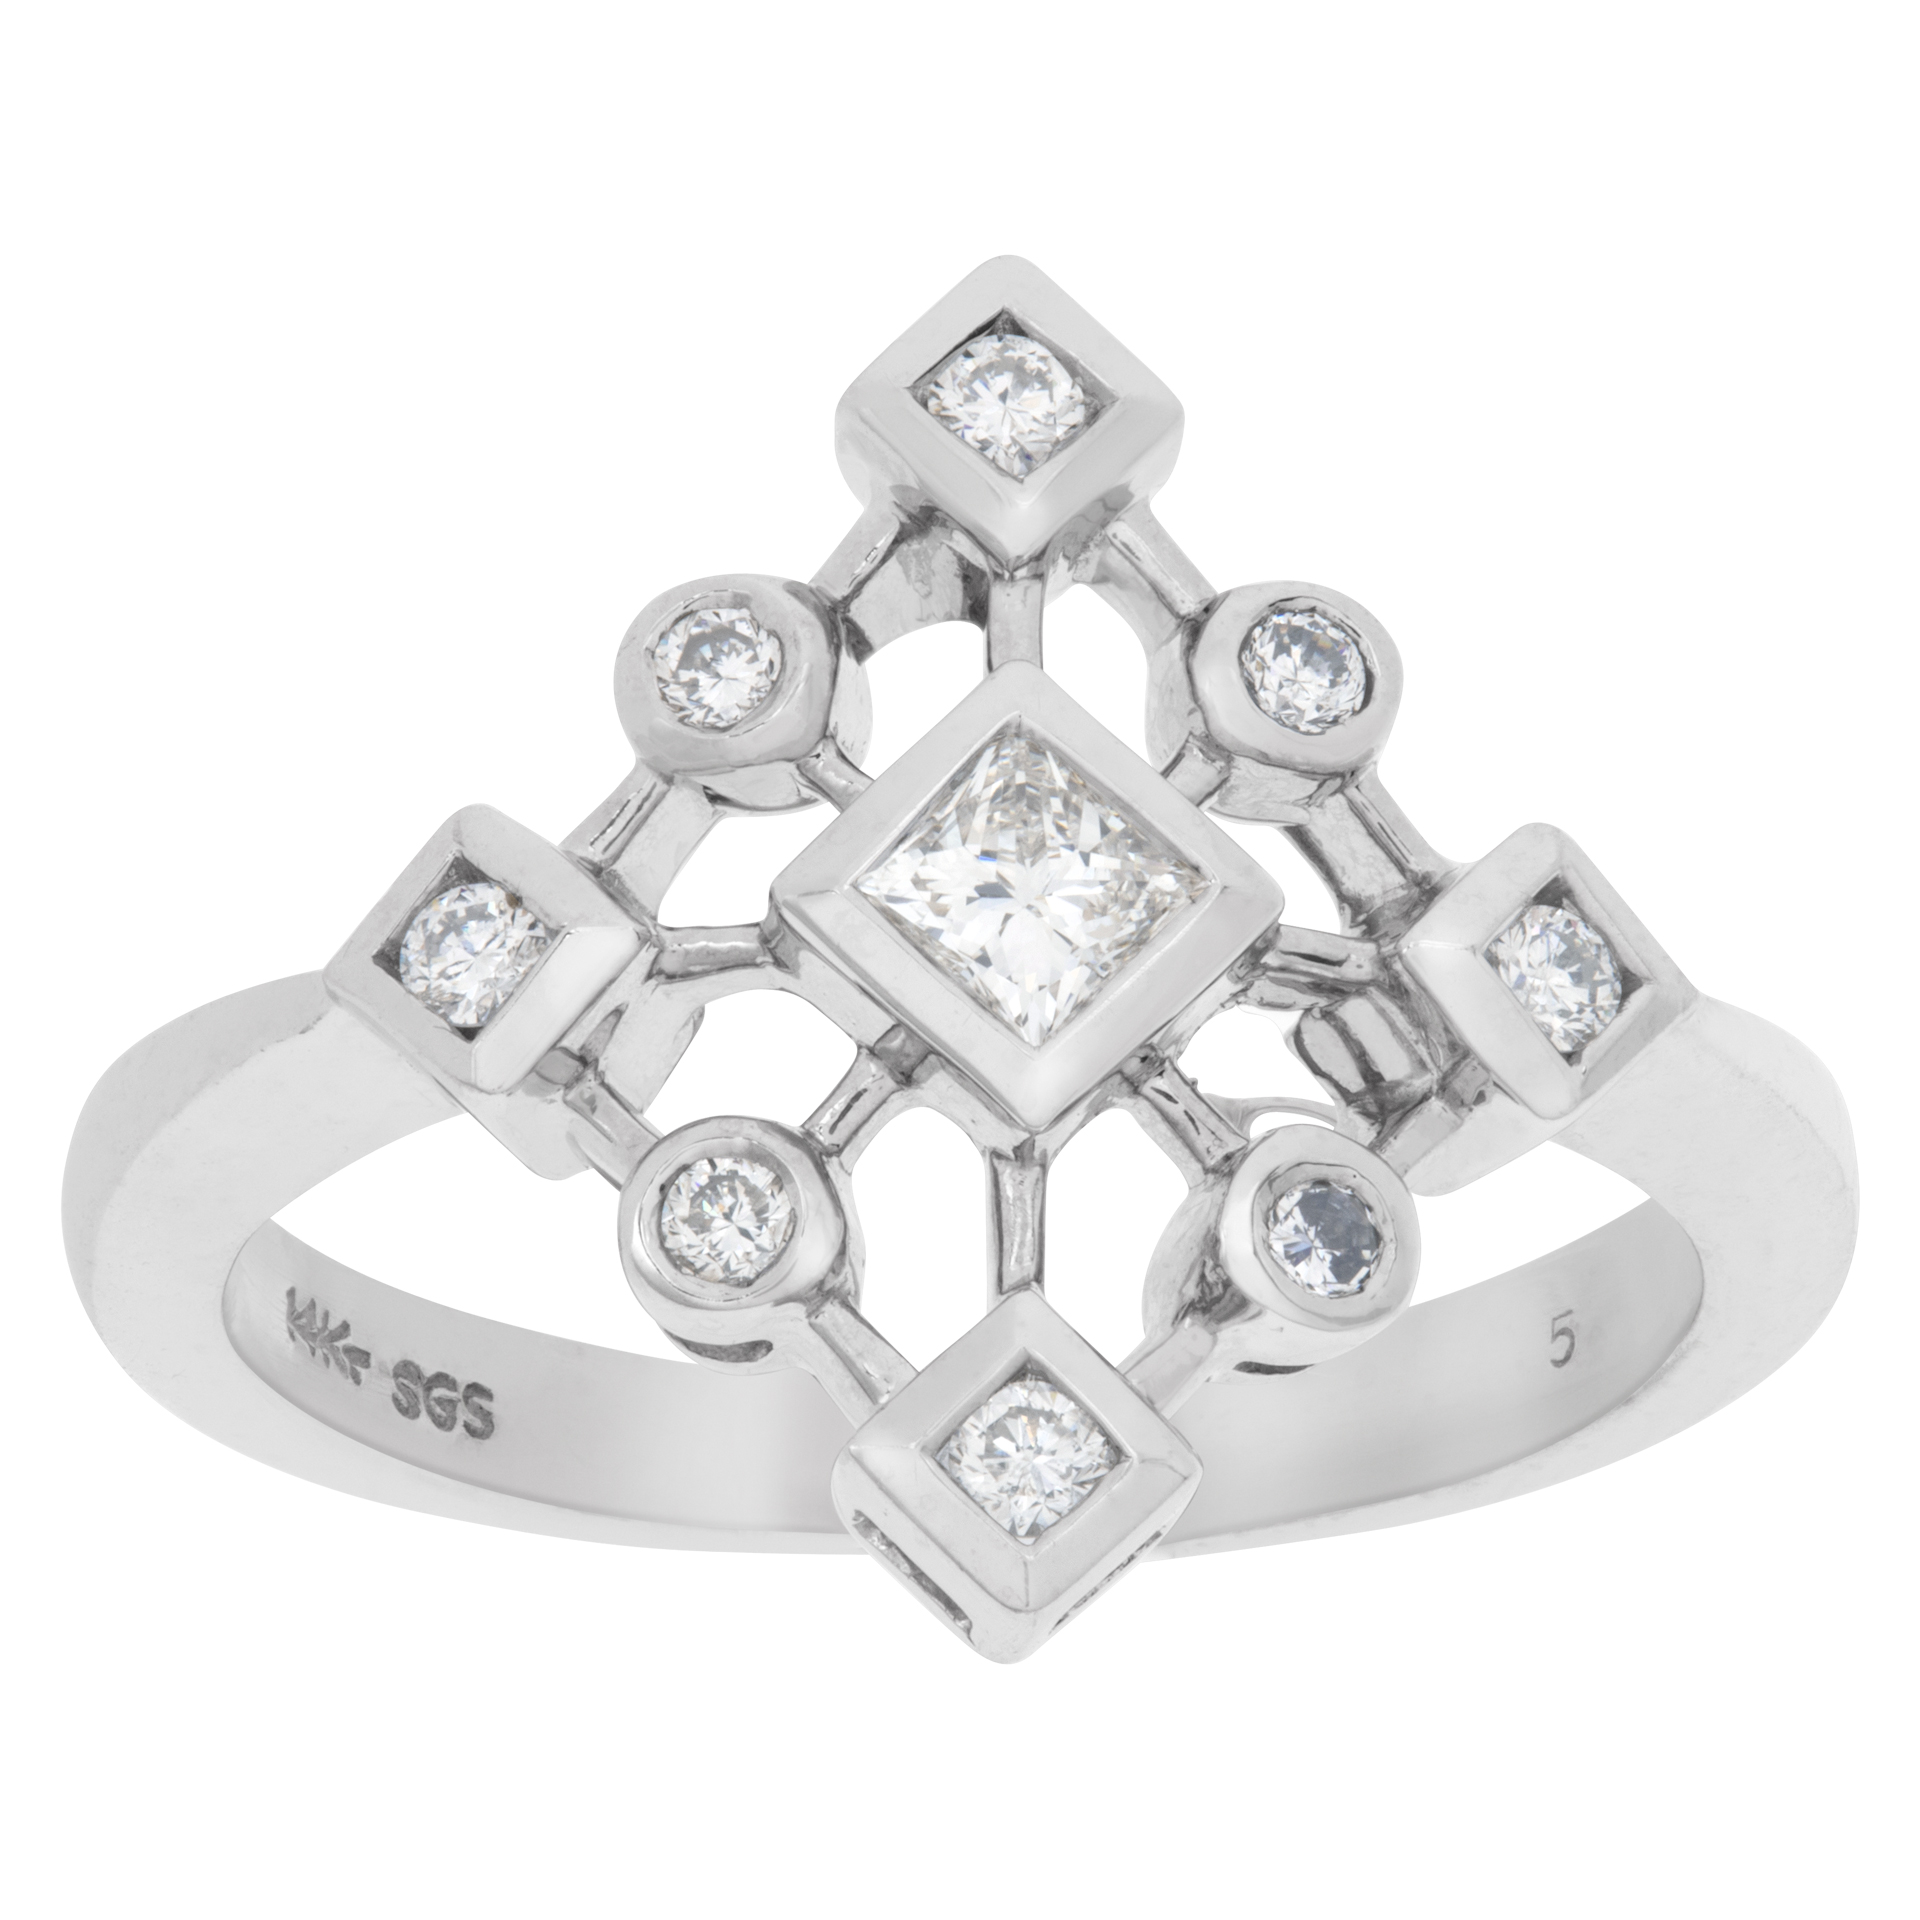 14k white gold snowflake ring with 0.25 carat in princess cut and round diamonds